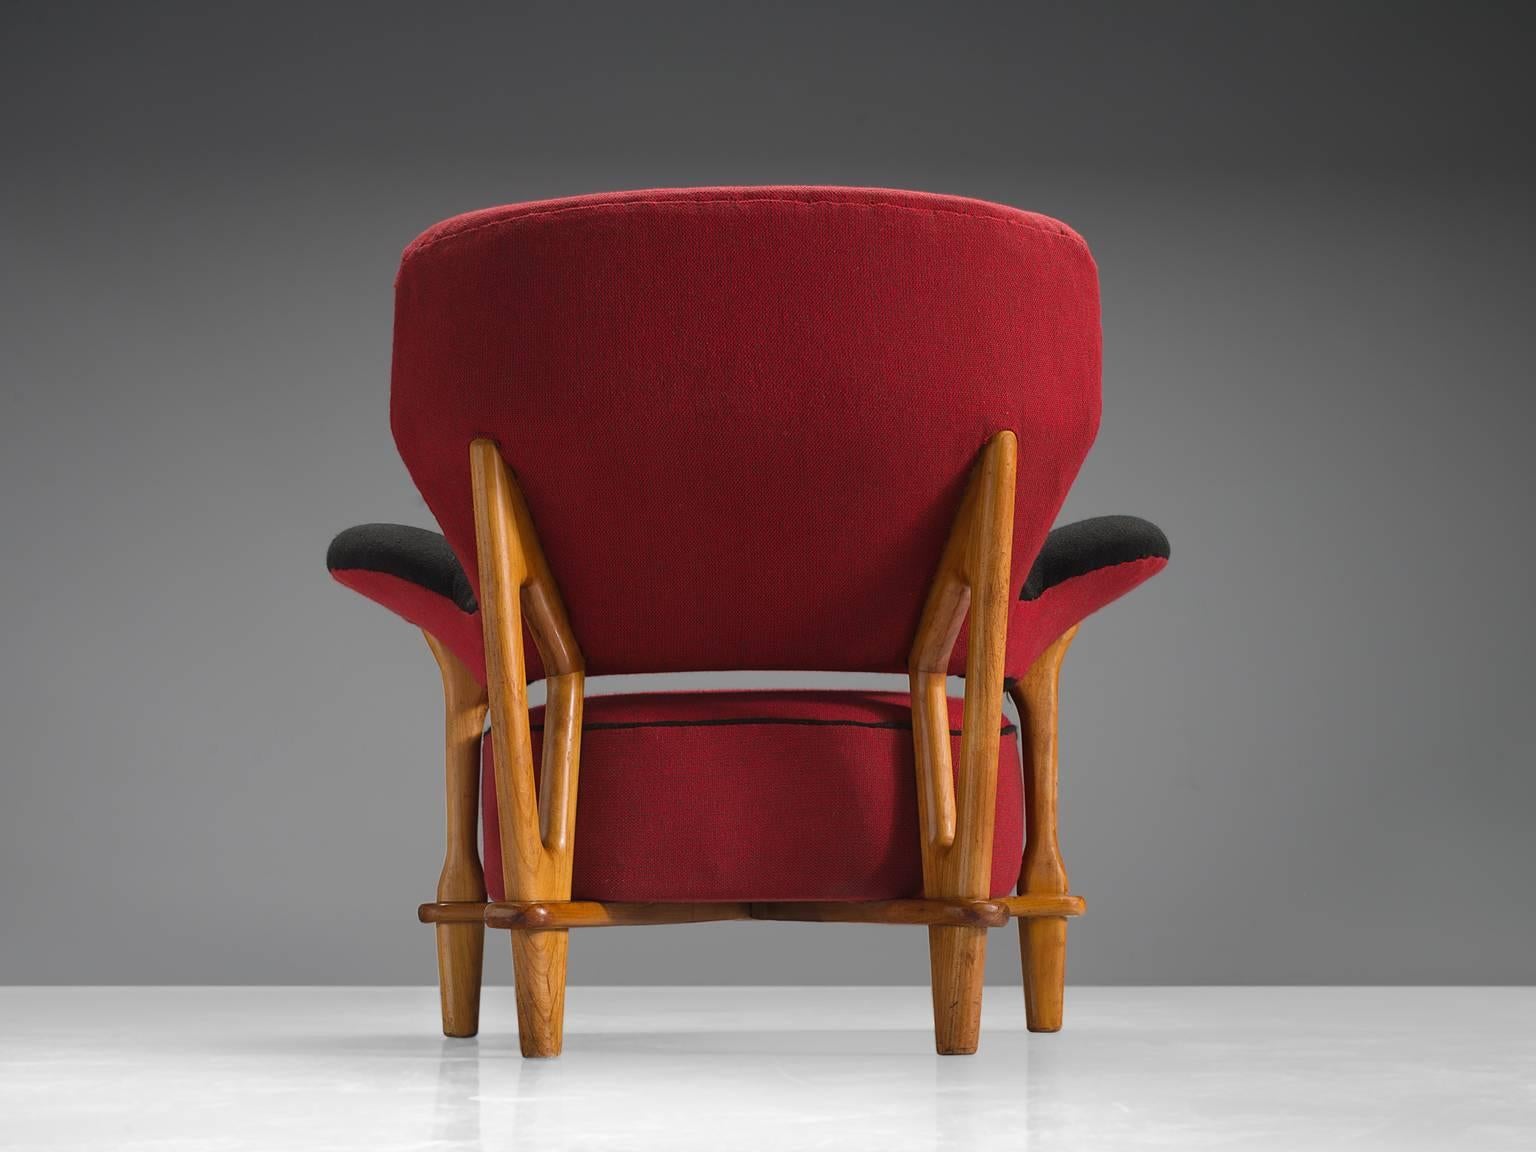 Theo Ruth for Artifort, armchair, beech, red fabric, the Netherlands, 1950s.

This velvet, voluptuous armchair by Theo Ruth is a very strong singular item. The back flows with a natural grace into the armrests. The open gap between the backrest and